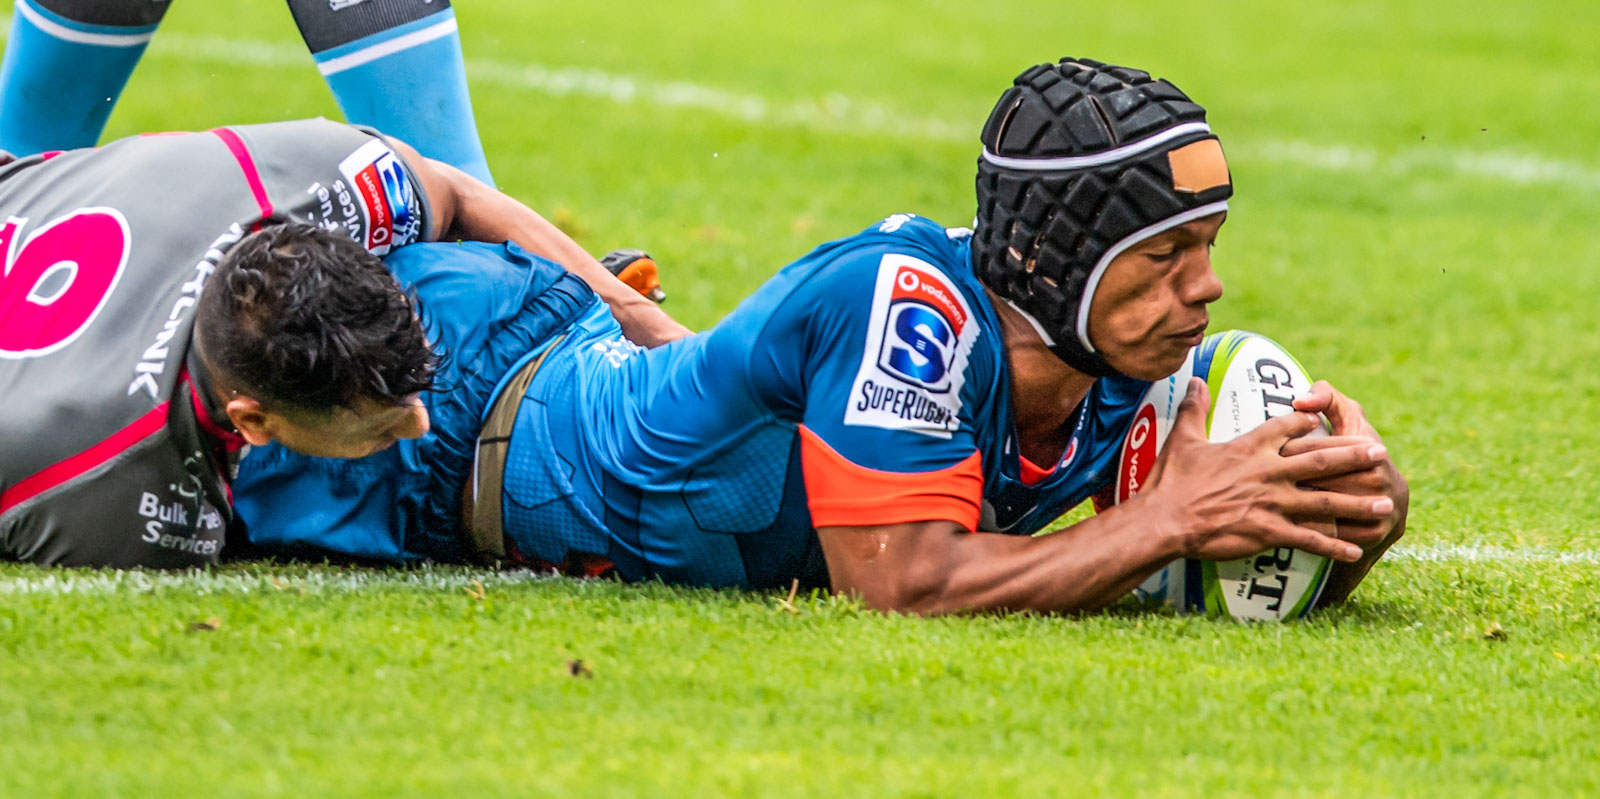 Kurt-Lee Arendse scored the first try of the match.